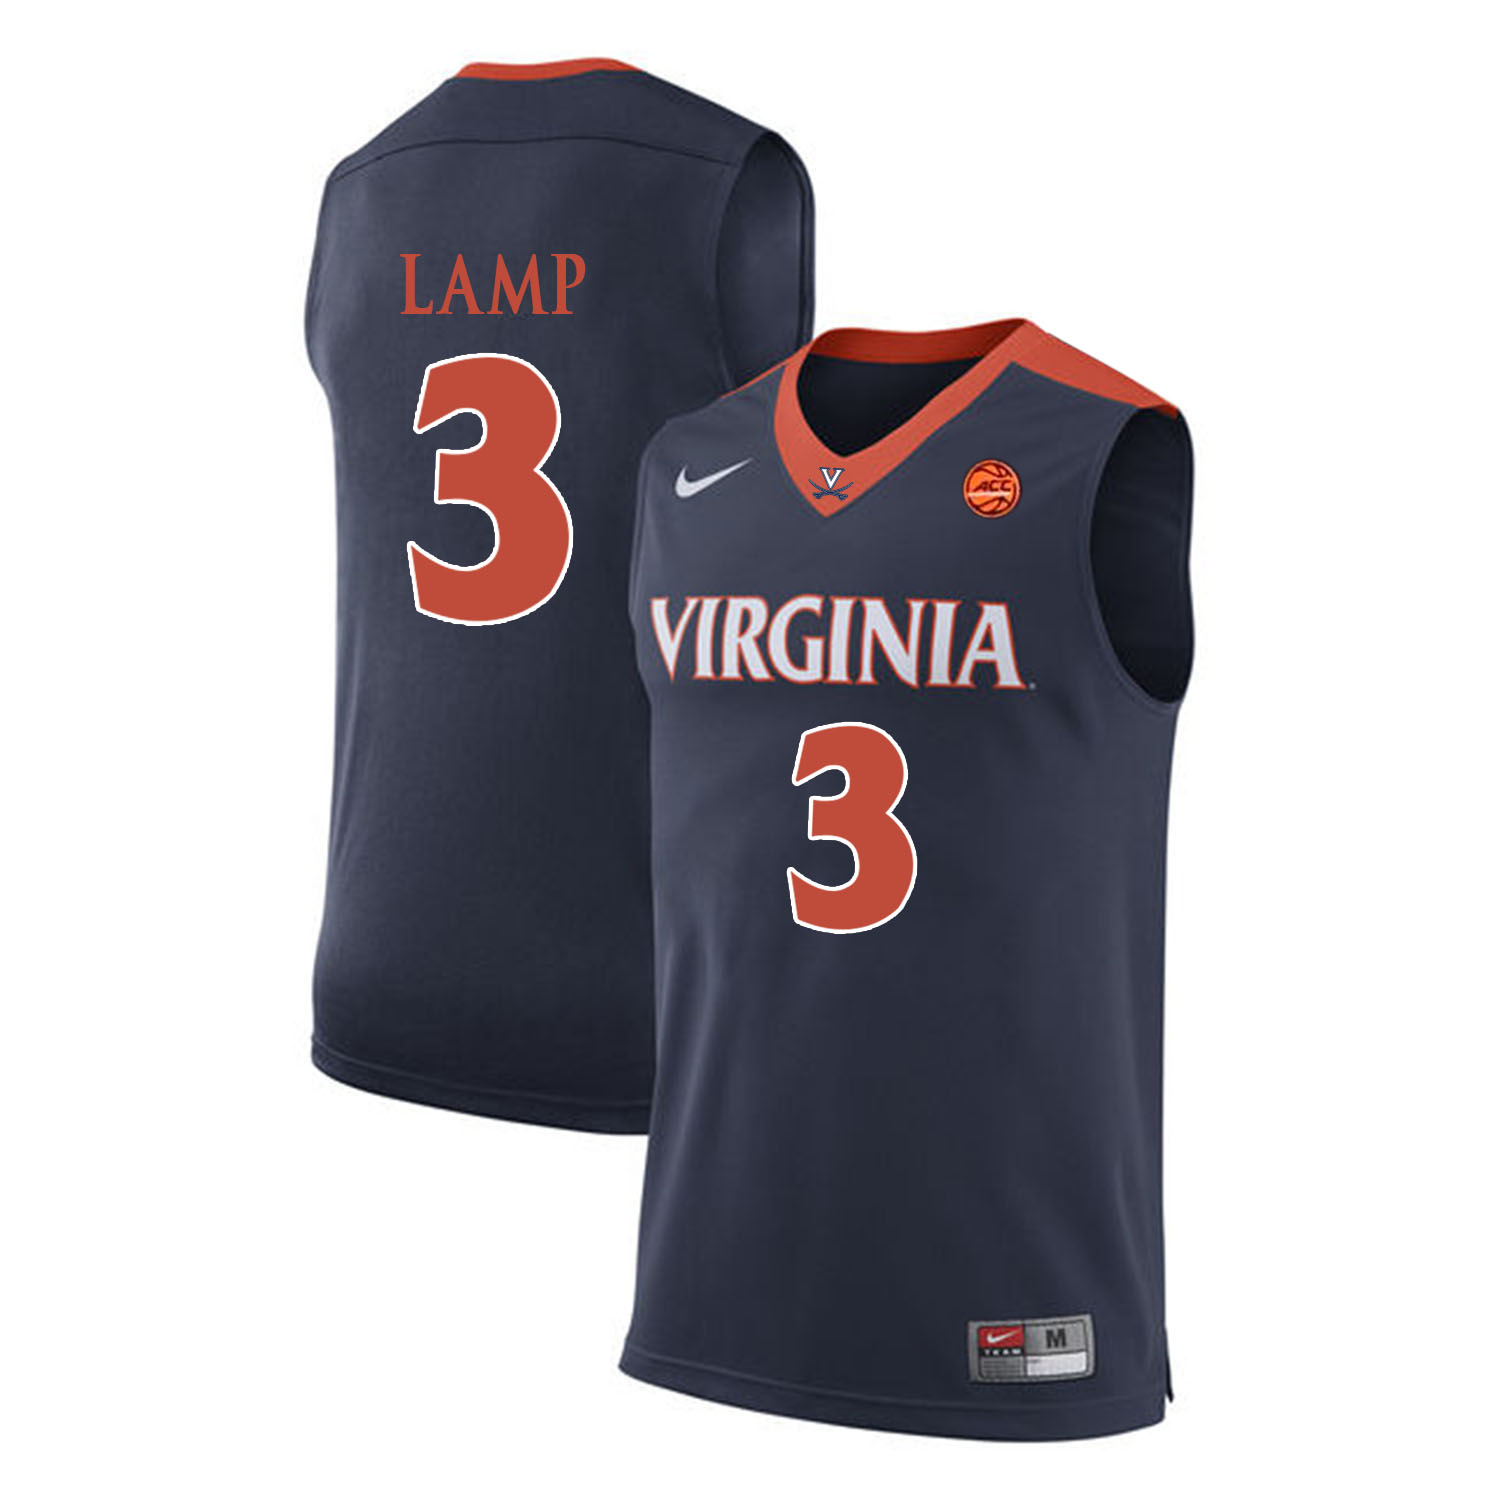 Virginia Cavaliers 3 Jeff Lamp Navy College Basketball Jersey - Click Image to Close